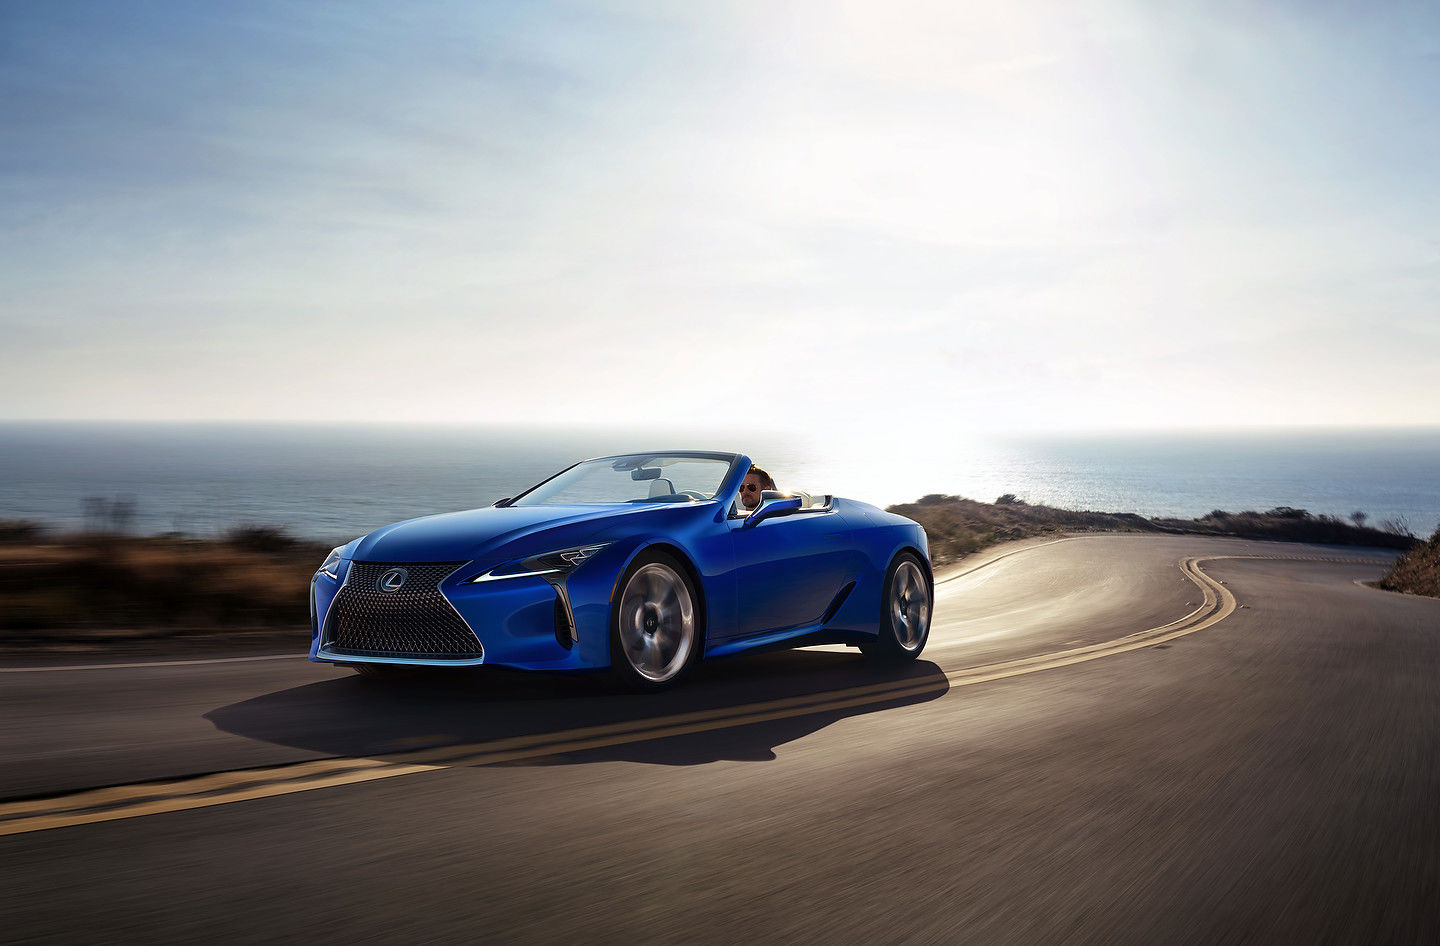 The New Lexus LC 500 Cabriolet Presented at the Los Angeles Auto Show